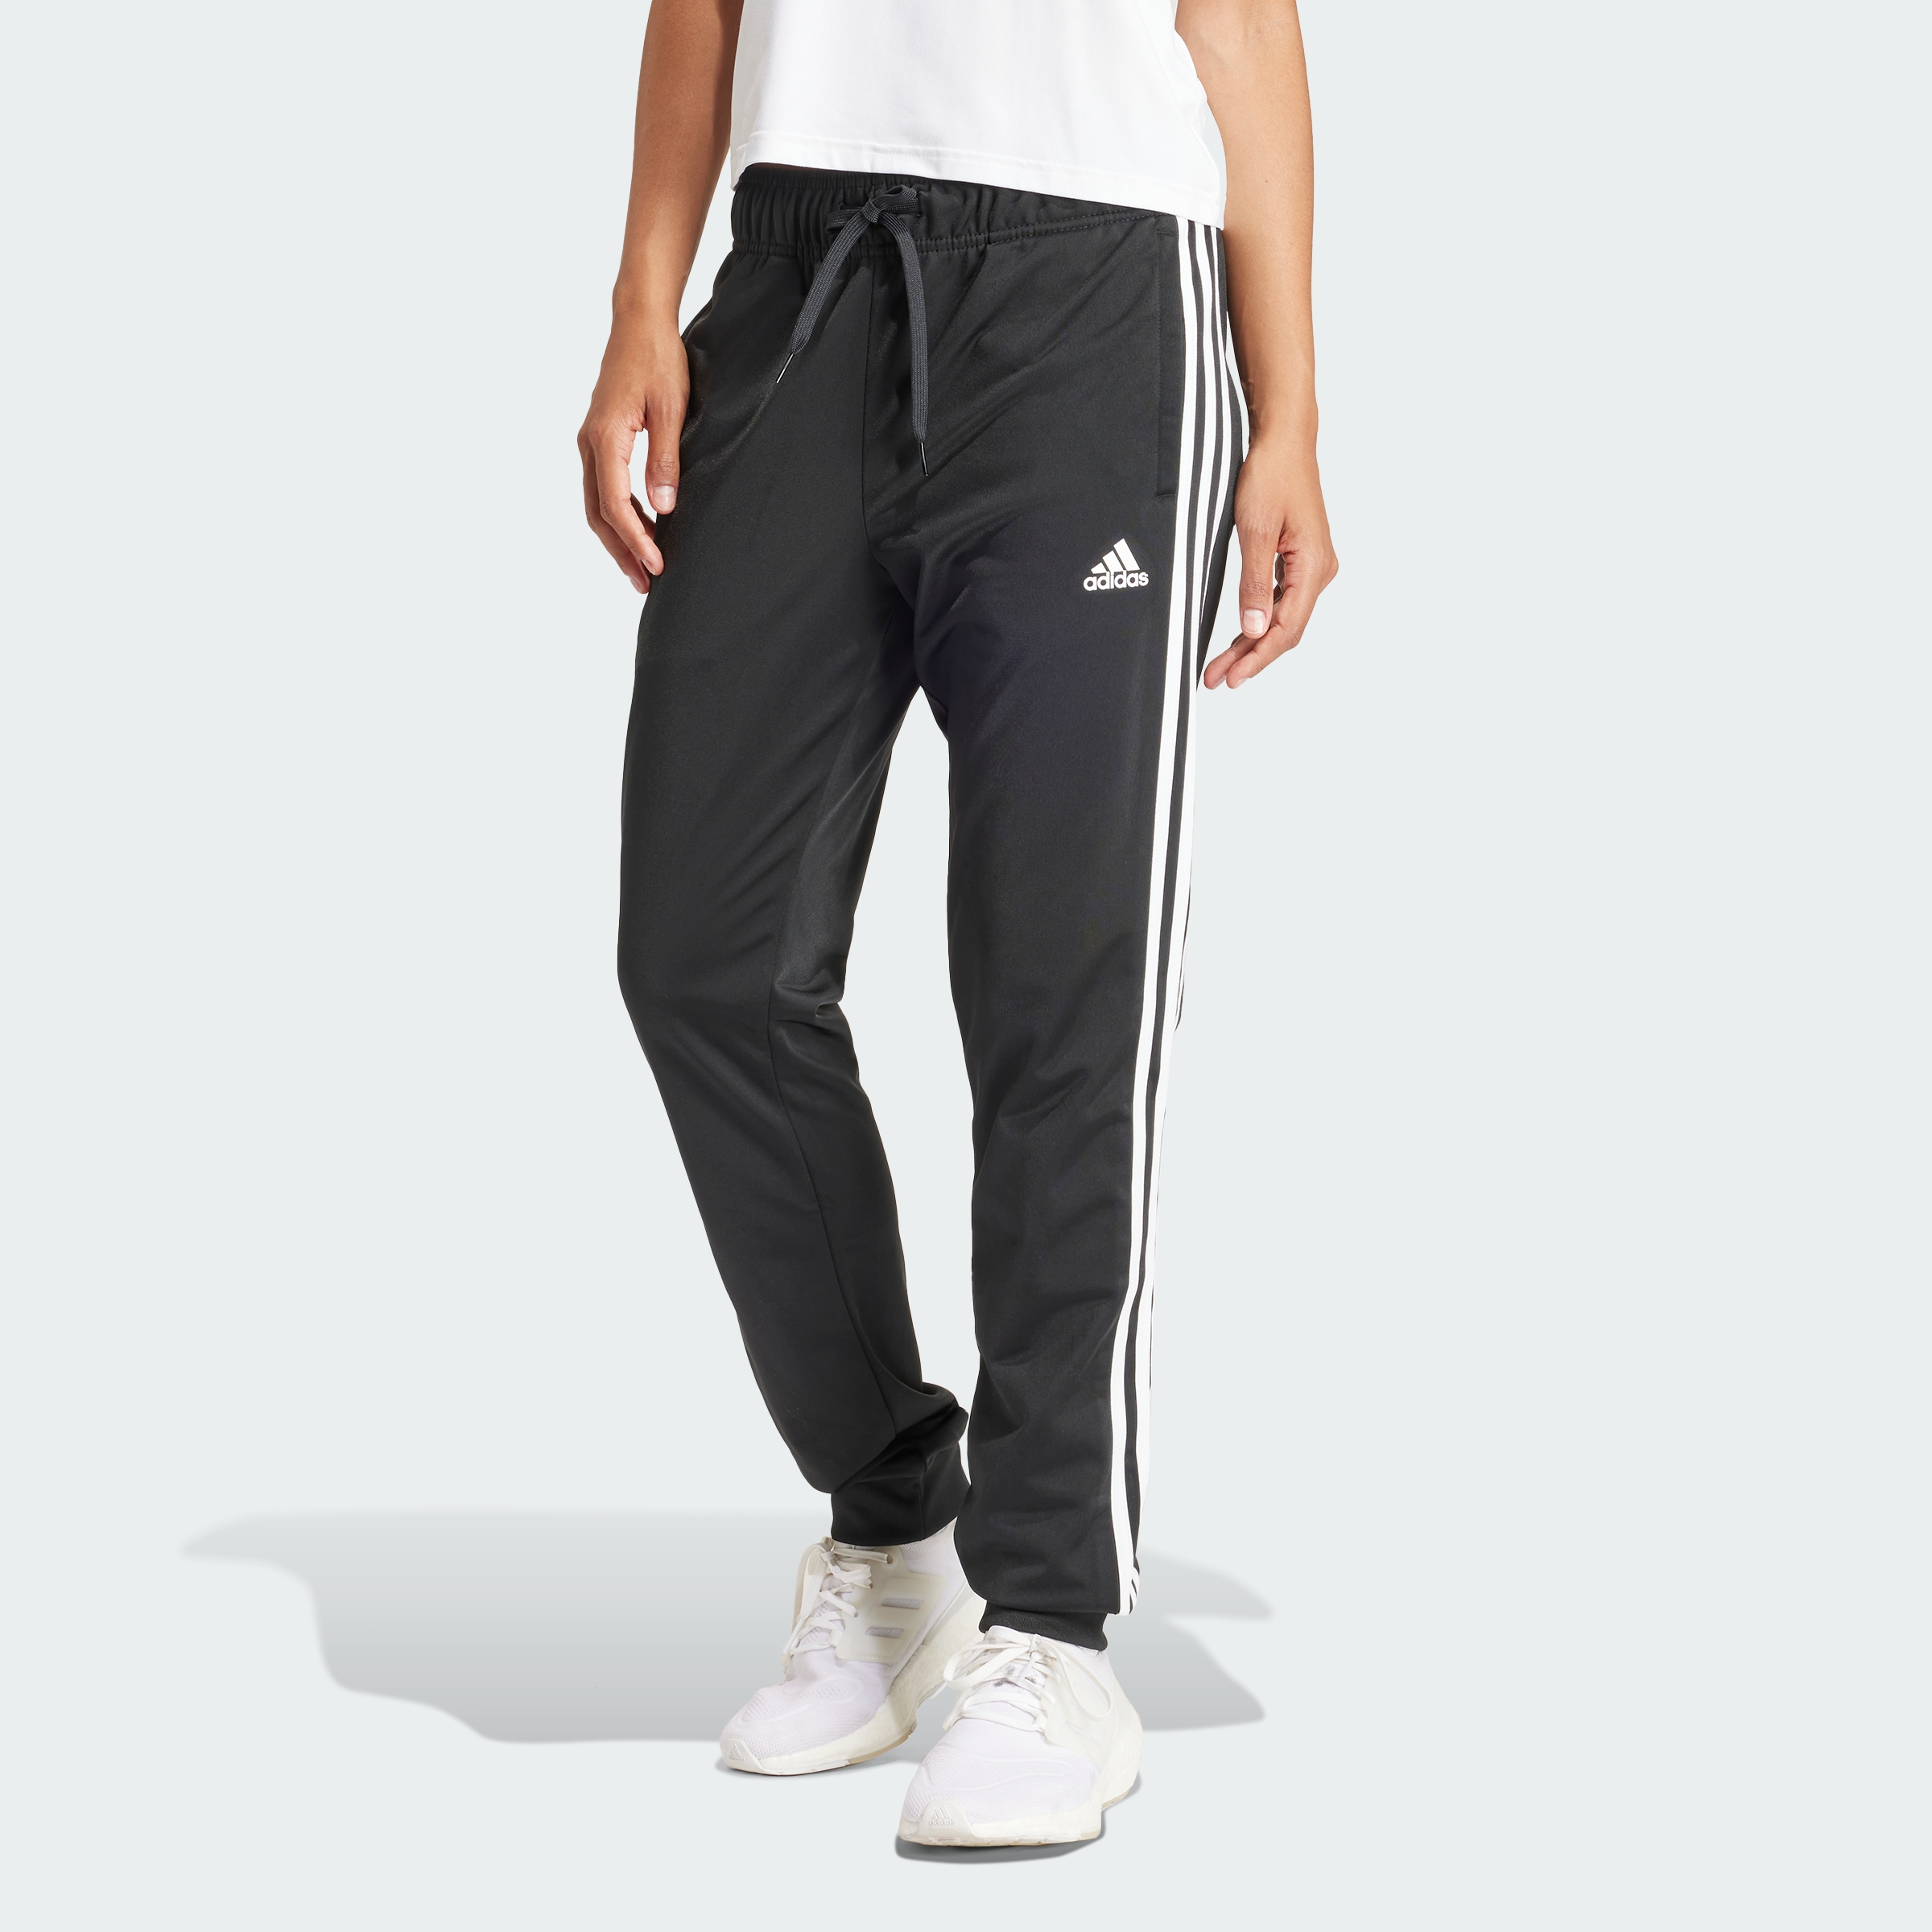 ADIDAS ORIGINALS + Wales Bonner embroidered recycled stretch-piqué pants |  NET-A-PORTER